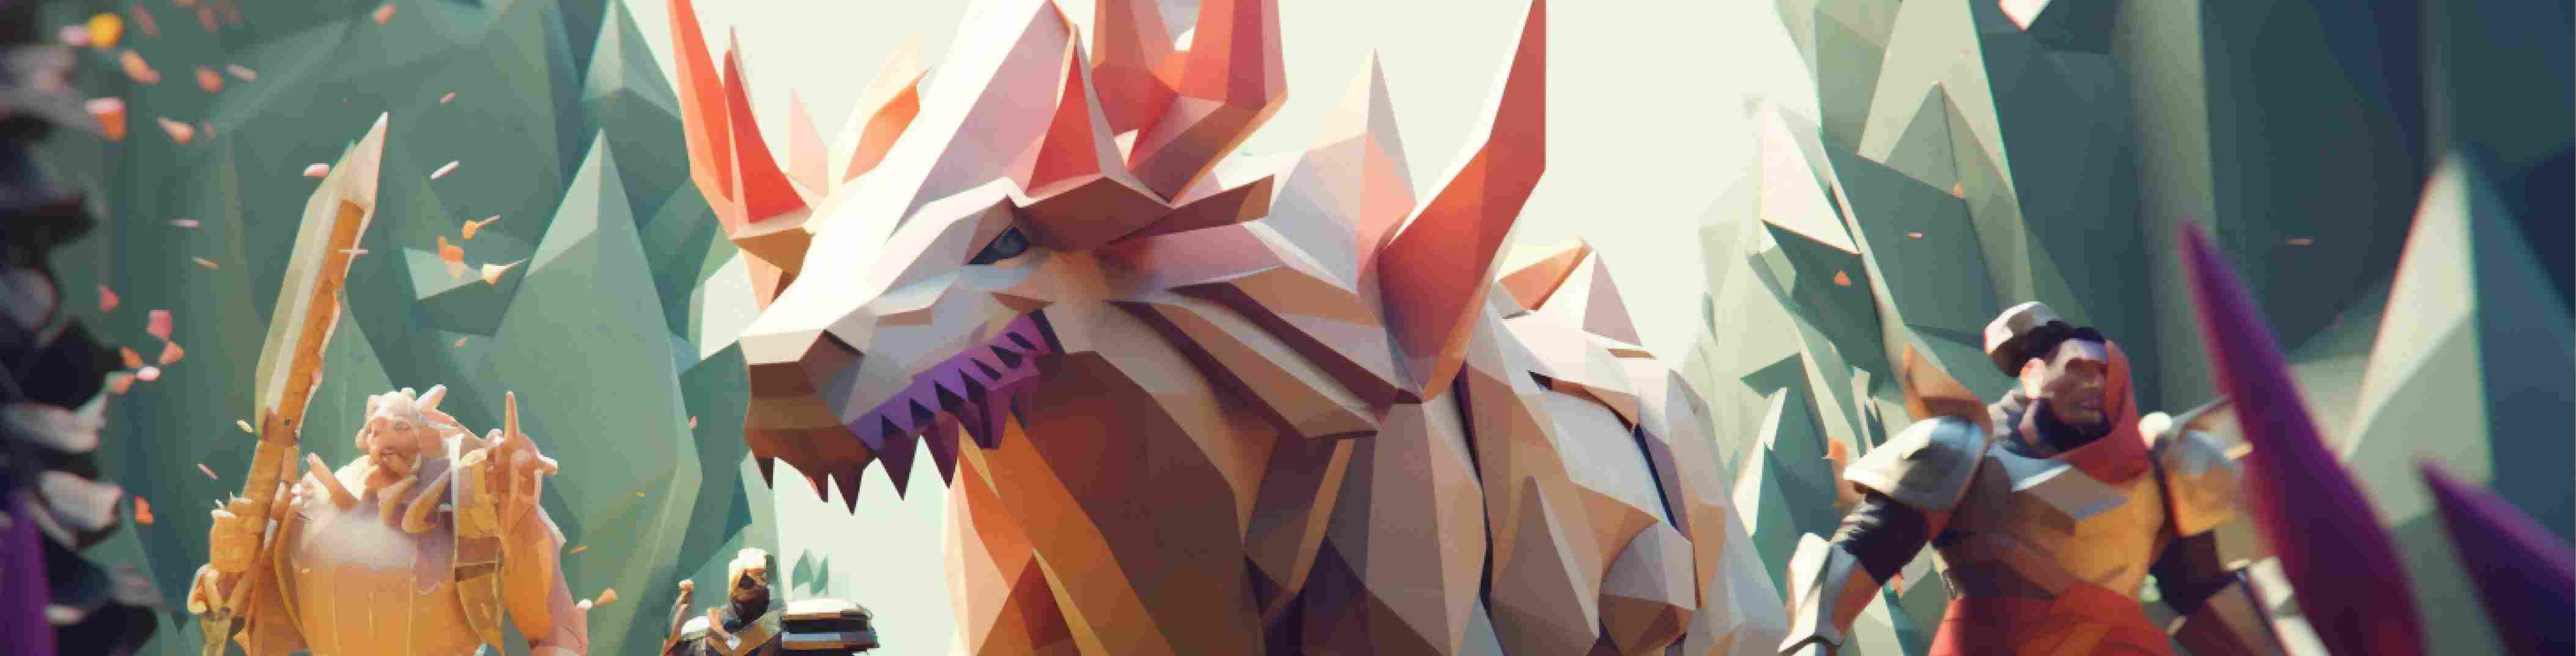 Low poly illustration of a knight, a dragon and a wizard in a forest. - Low poly